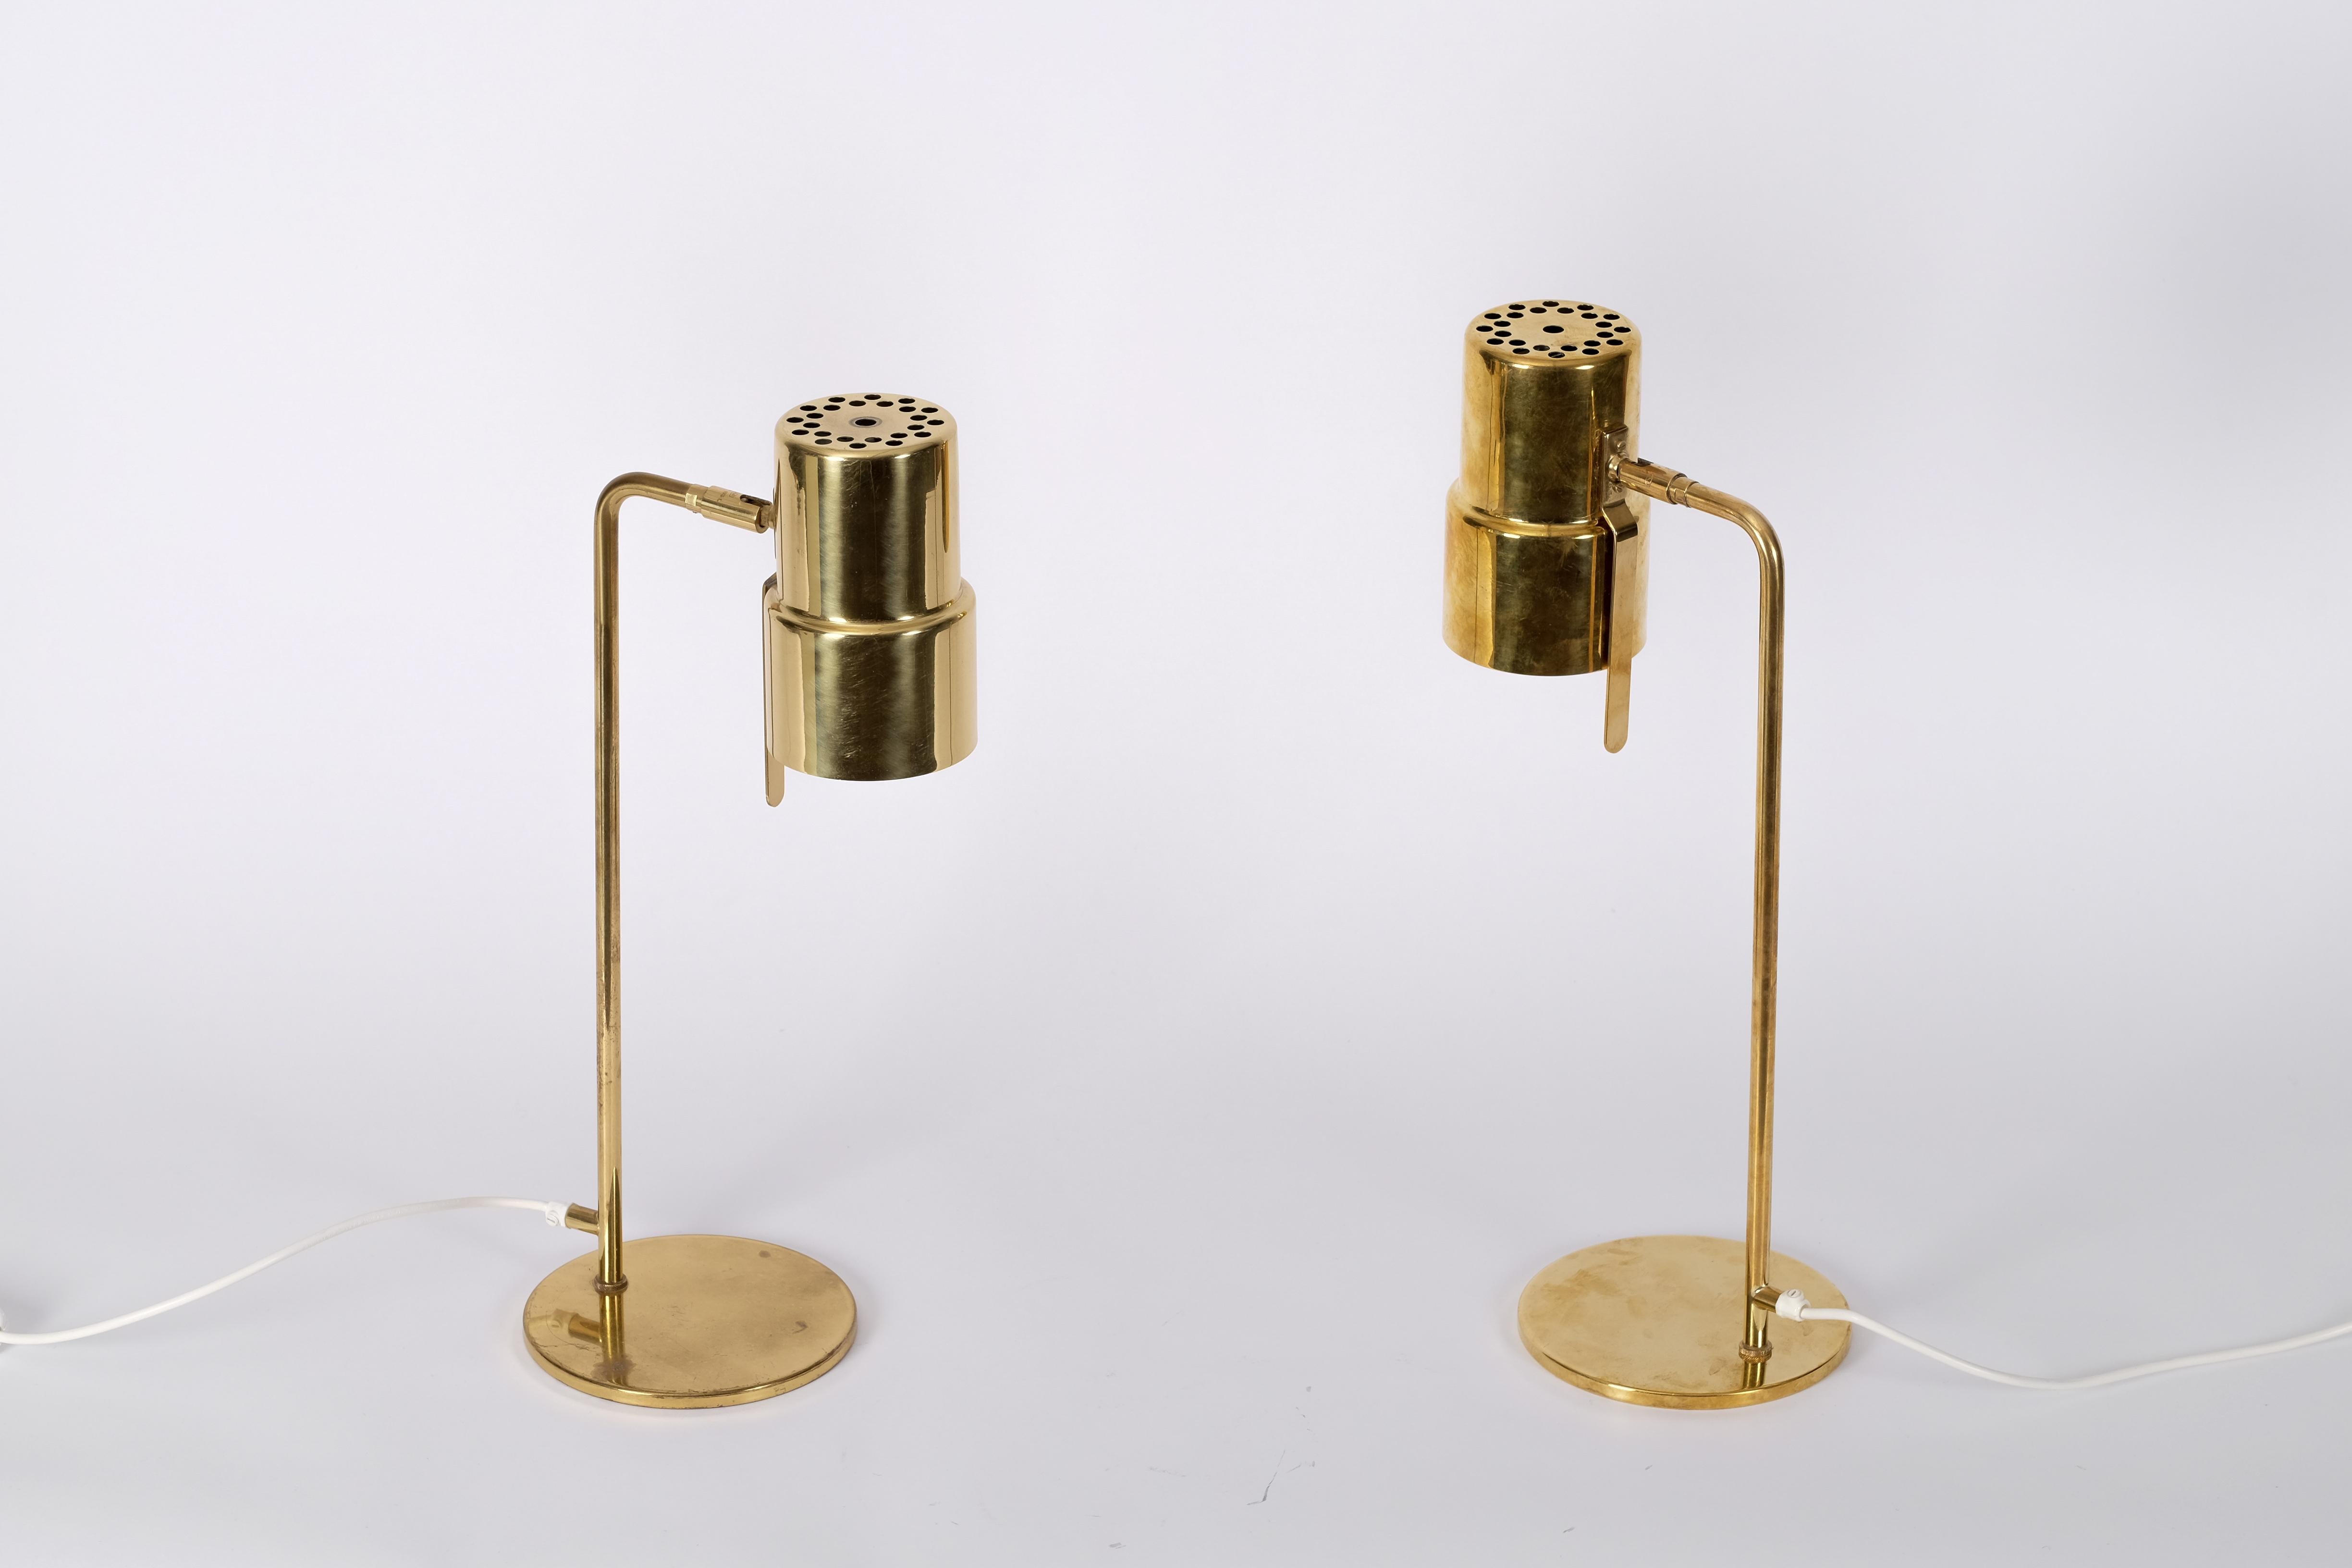 Pair of brass table lamps by Hans-Agne Jakobsson in great original condition.
Produced by Hans-Agne Jakobsson, Markaryd, 1960s. Signed.

Measure: Height 50 cm.